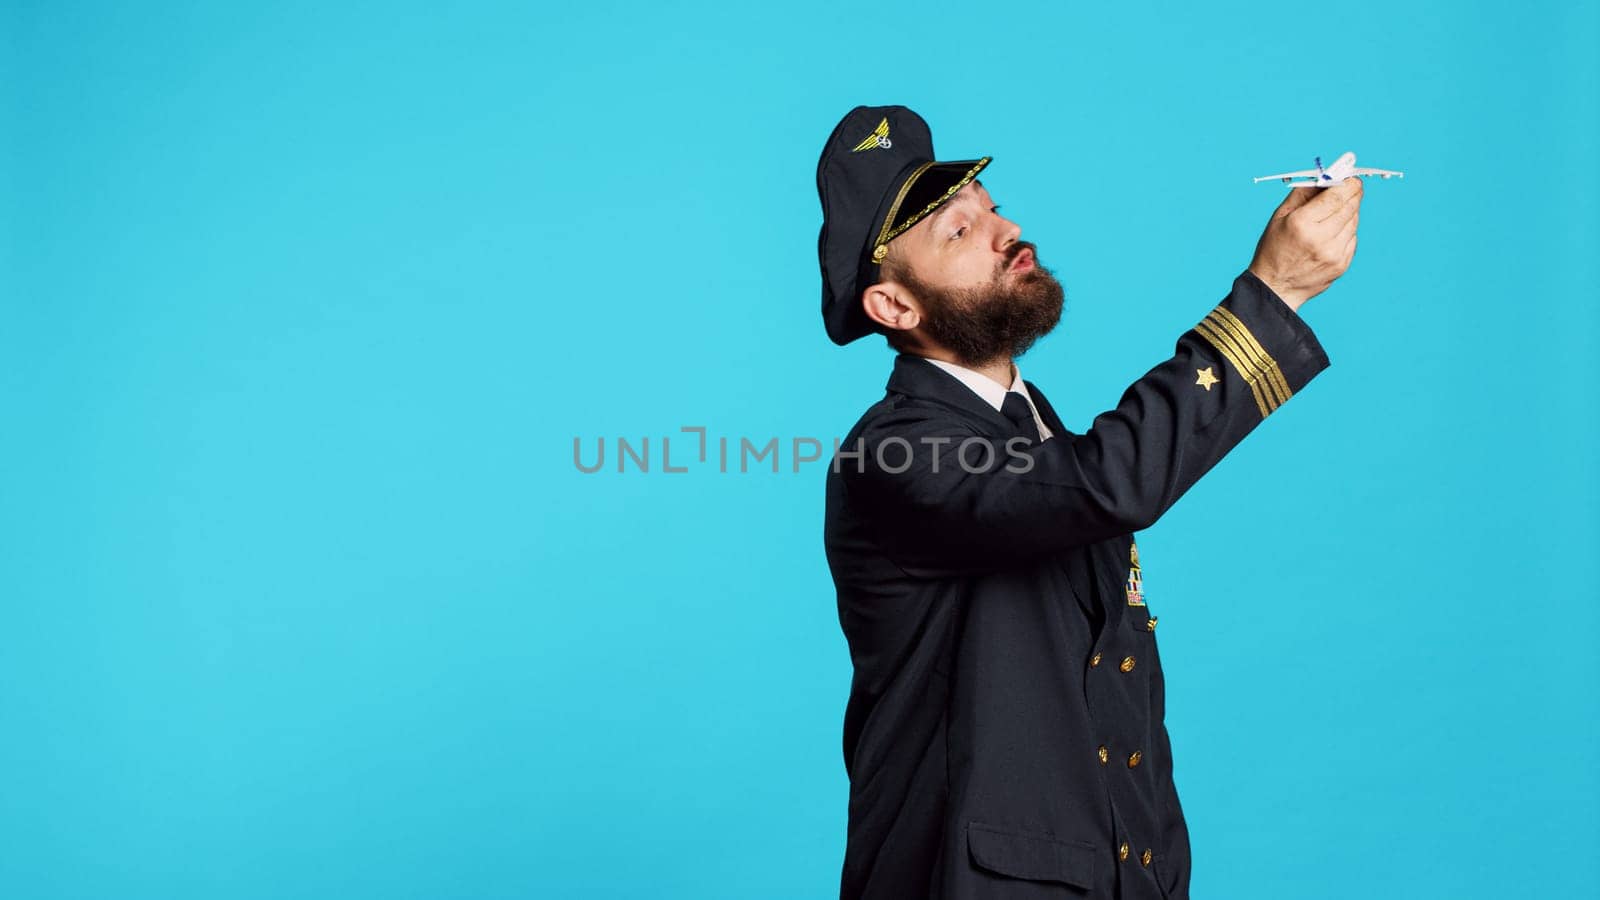 Caucasian man dressed as pilot playing with airplane toy, showing miniature small artificial aircraft on camera. Young adult working as flying captain holding fake mini plane over blue backdrop.